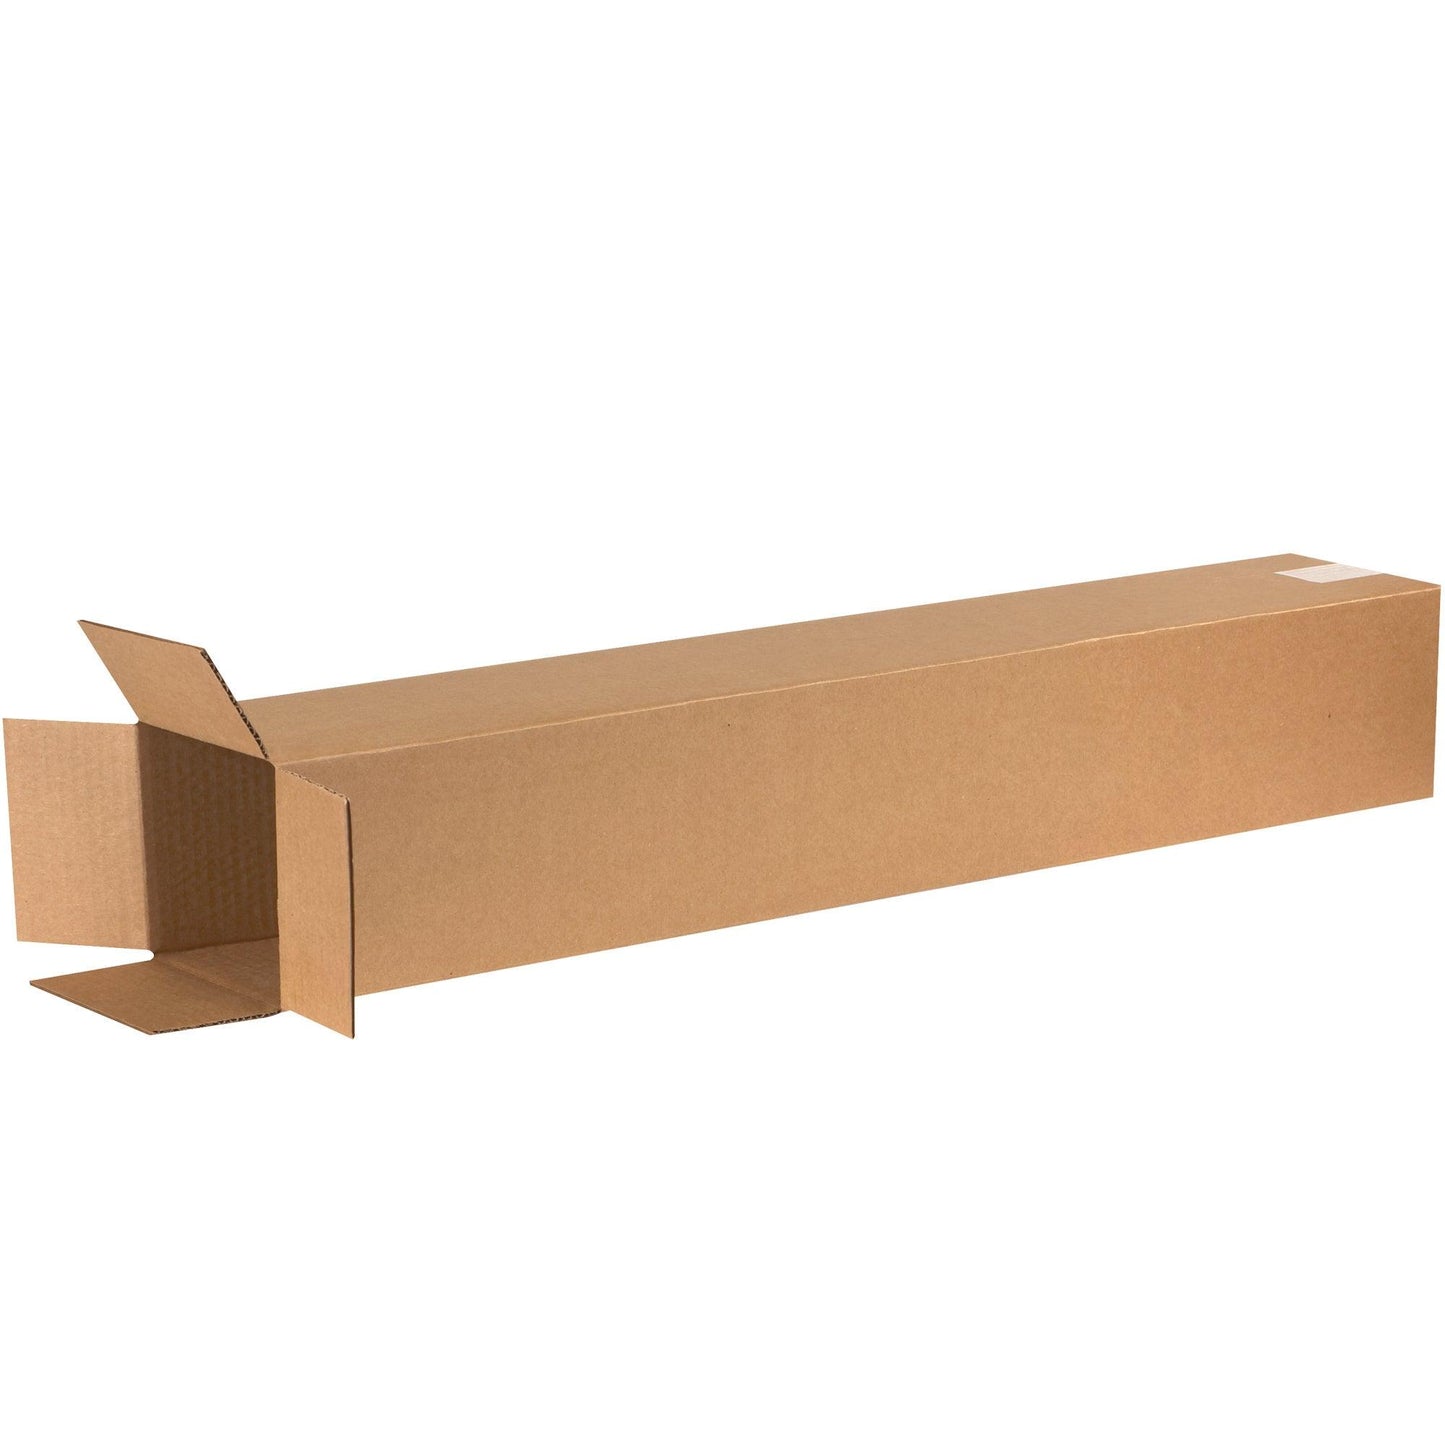 6 x 6 x 40" Tall Corrugated Boxes - 6640